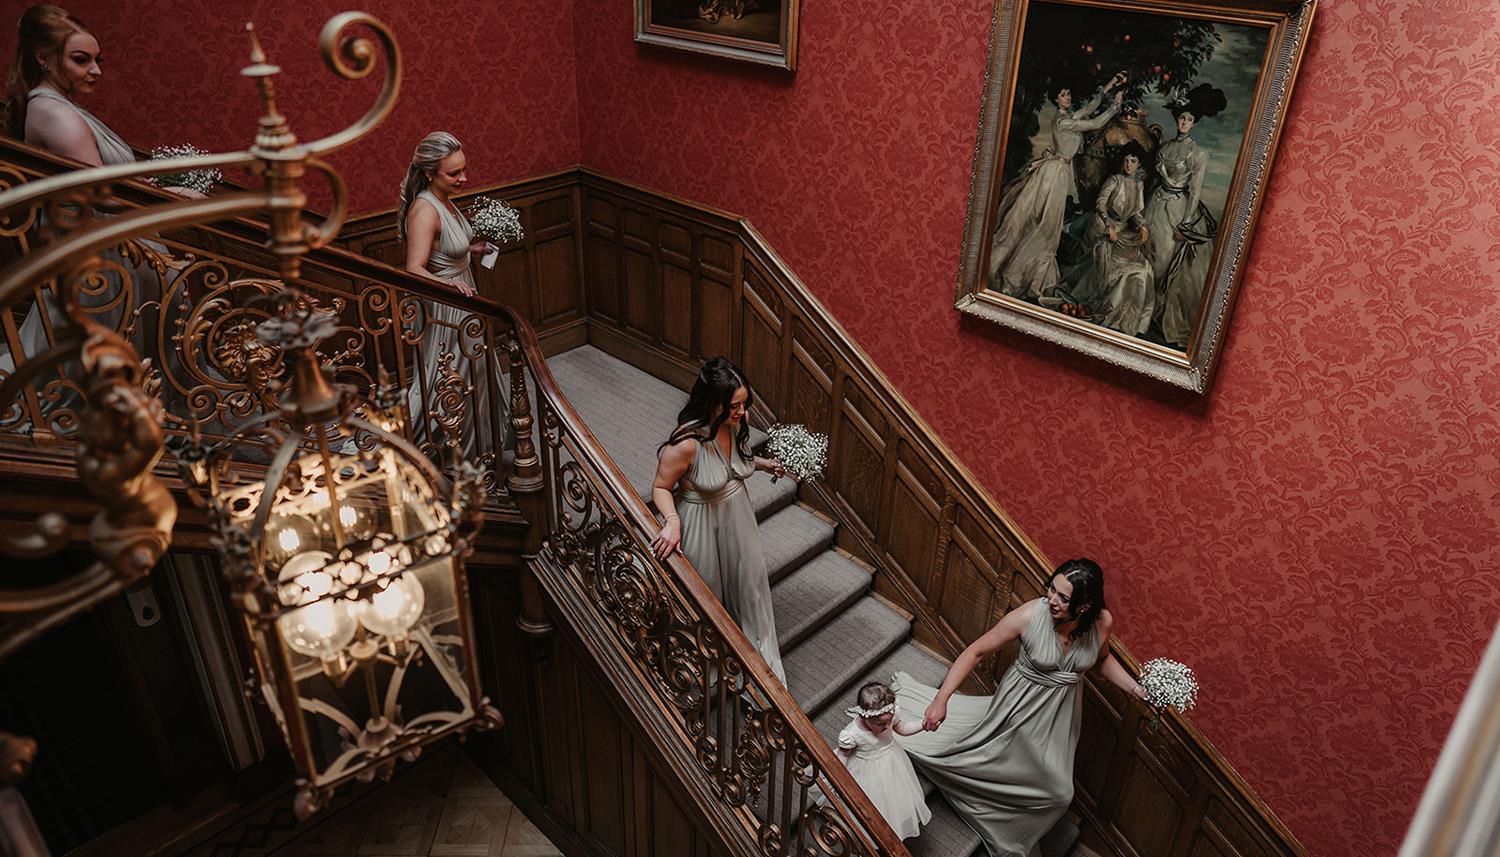 Descending the staircase. Photo Credit: Willow and Wilde